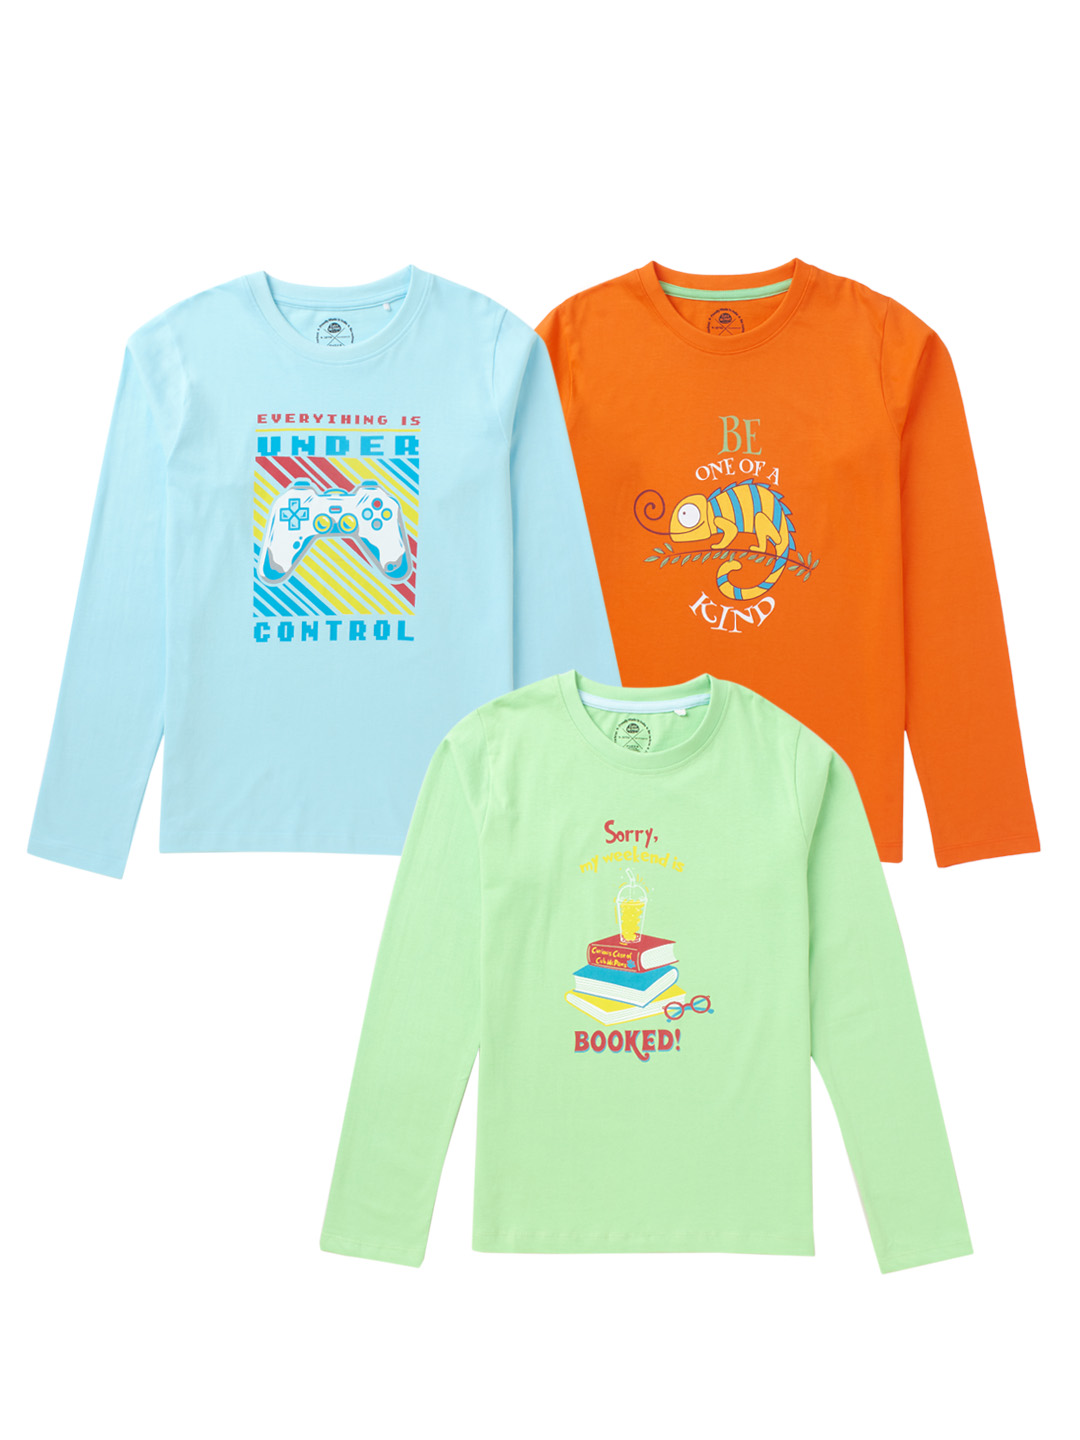 Boys Full Sleeves Pack of 3 T-Shirts 100% Cotton